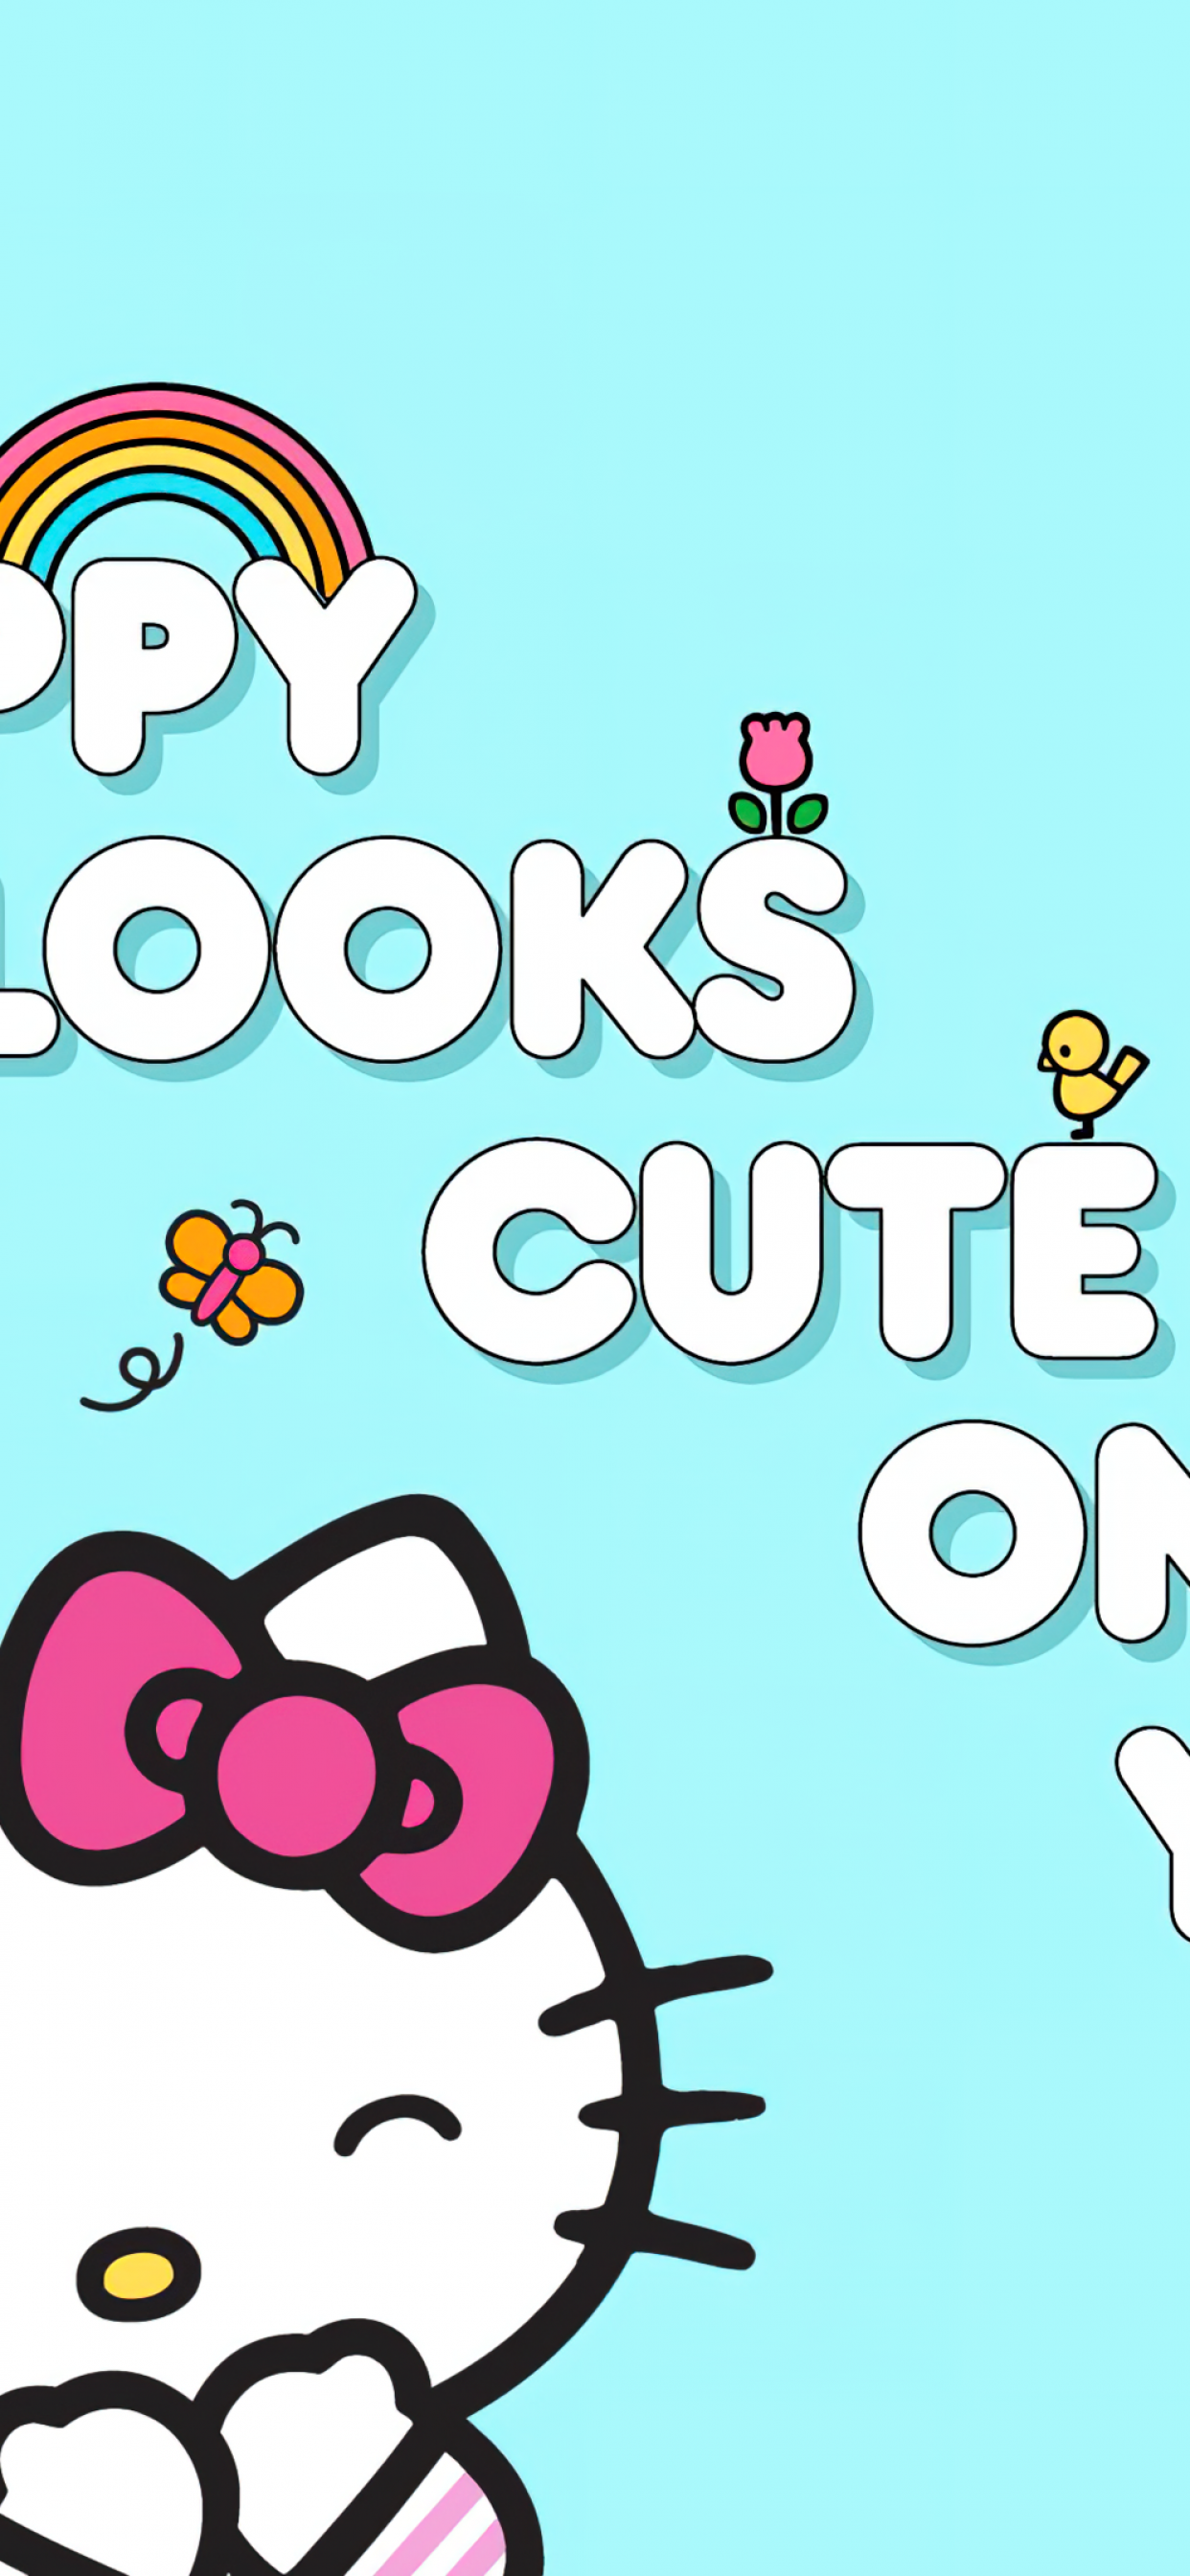 Happy looks cute on you Wallpaper 4K, Hello kitty quotes, #9932